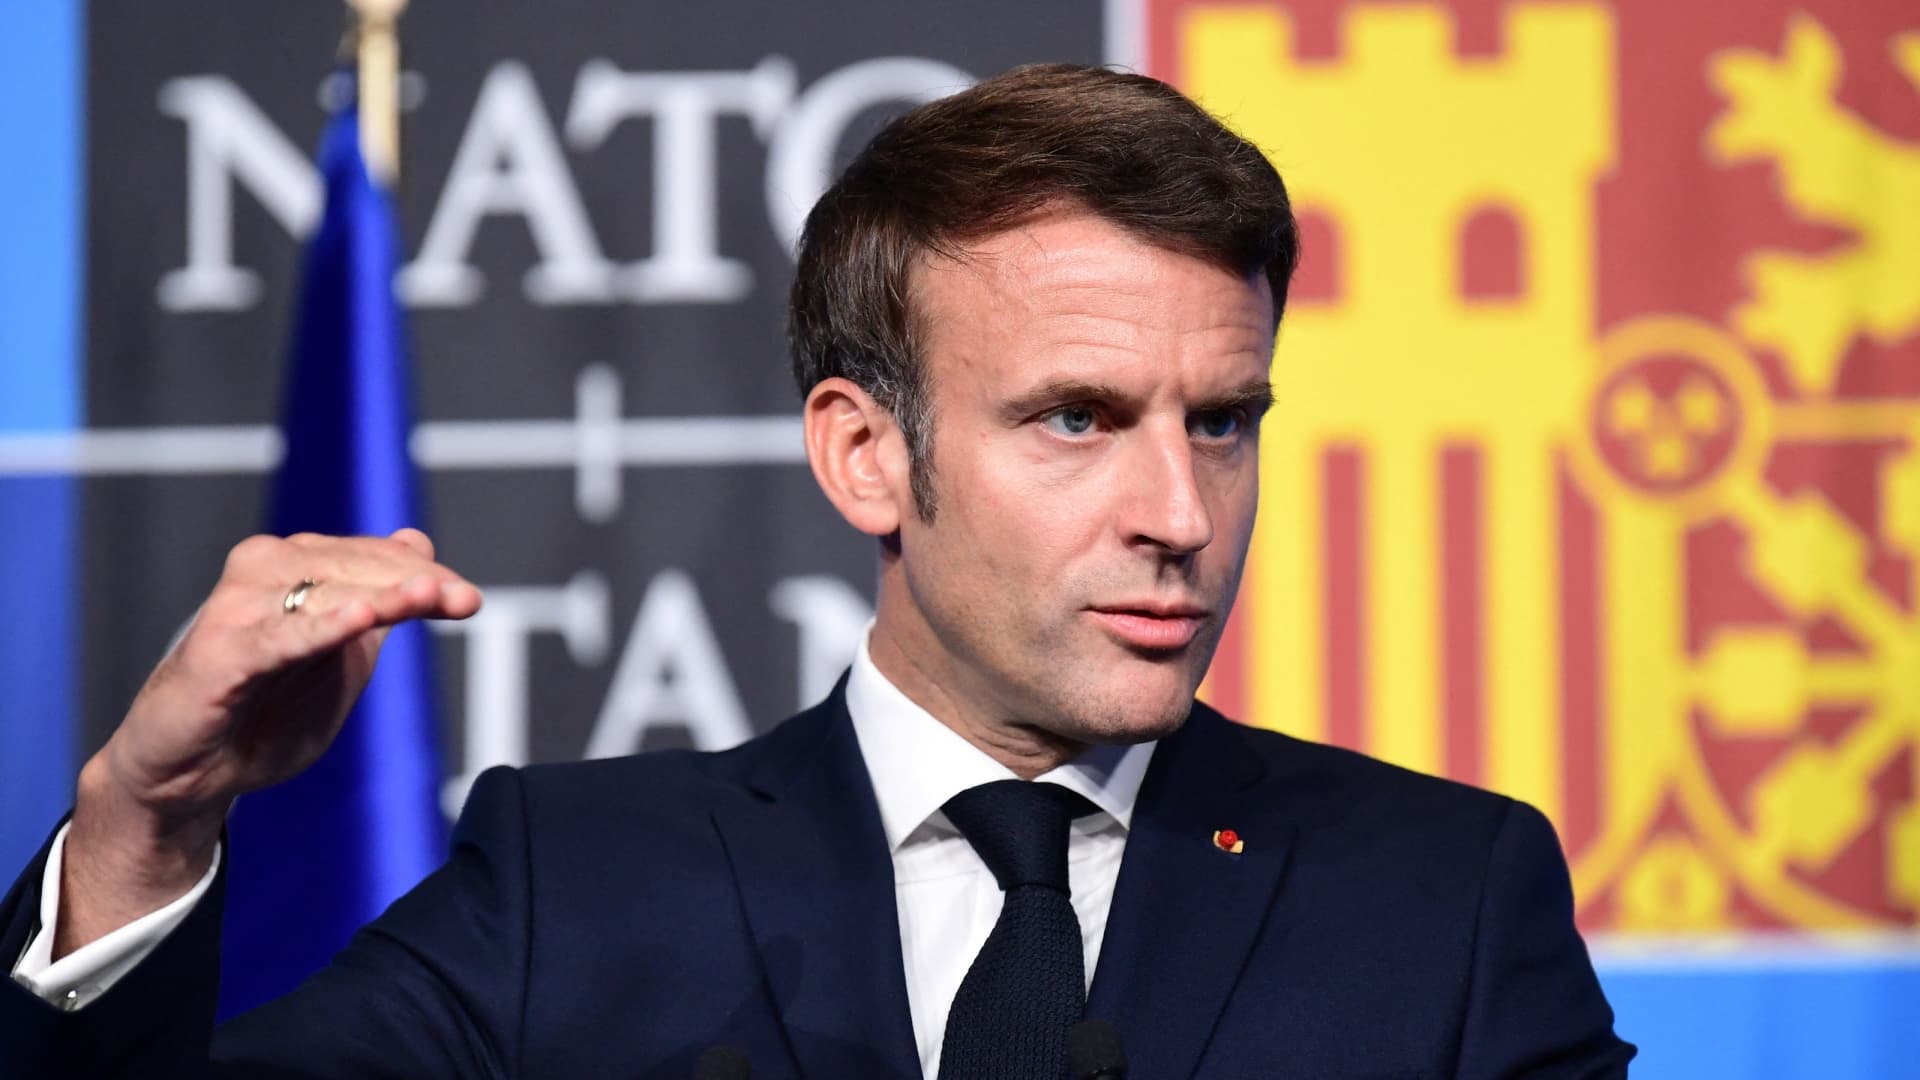 French President Emmanuel Macron gestures during a press conference on the last day of the NATO Heads of State summit in Madrid on June 30, 2022.